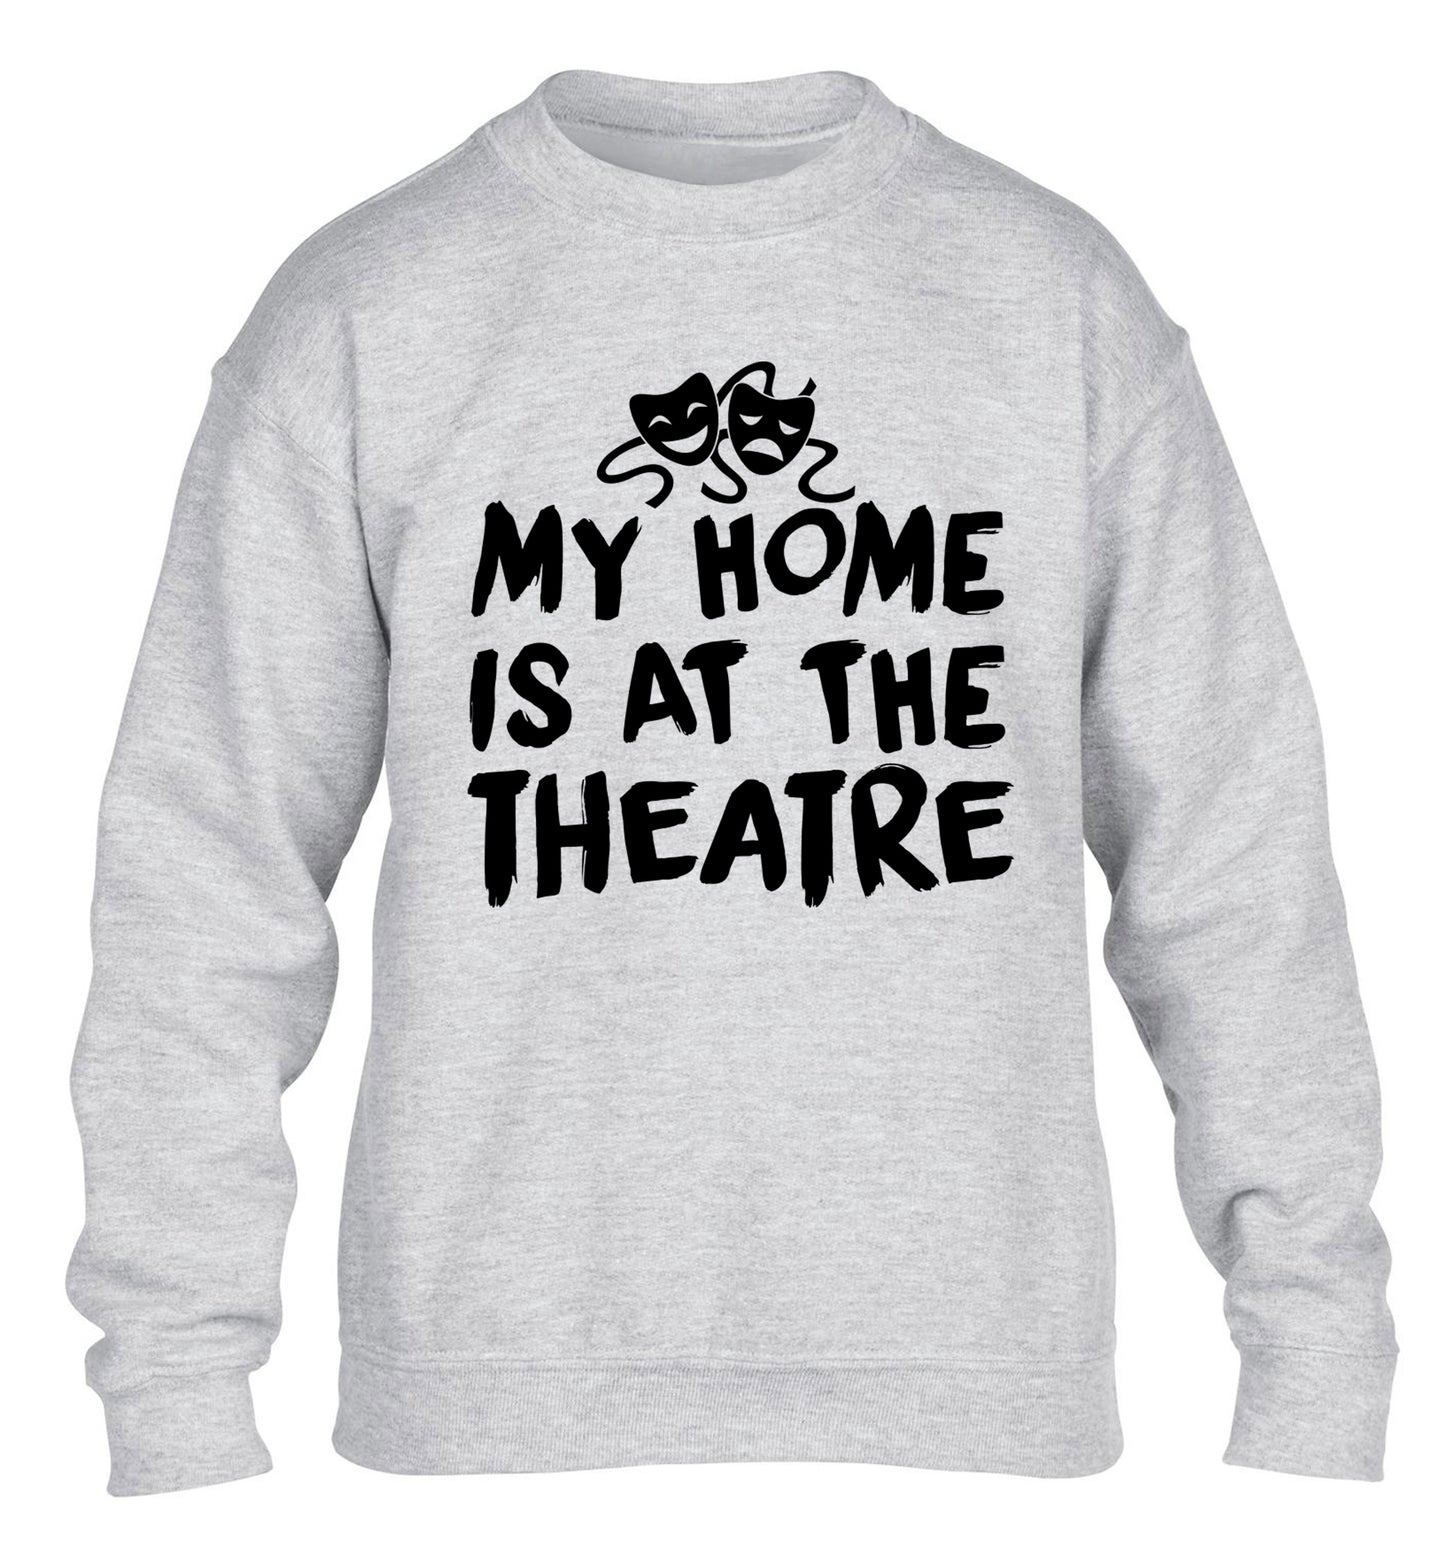 My home is at the theatre children's grey sweater 12-14 Years